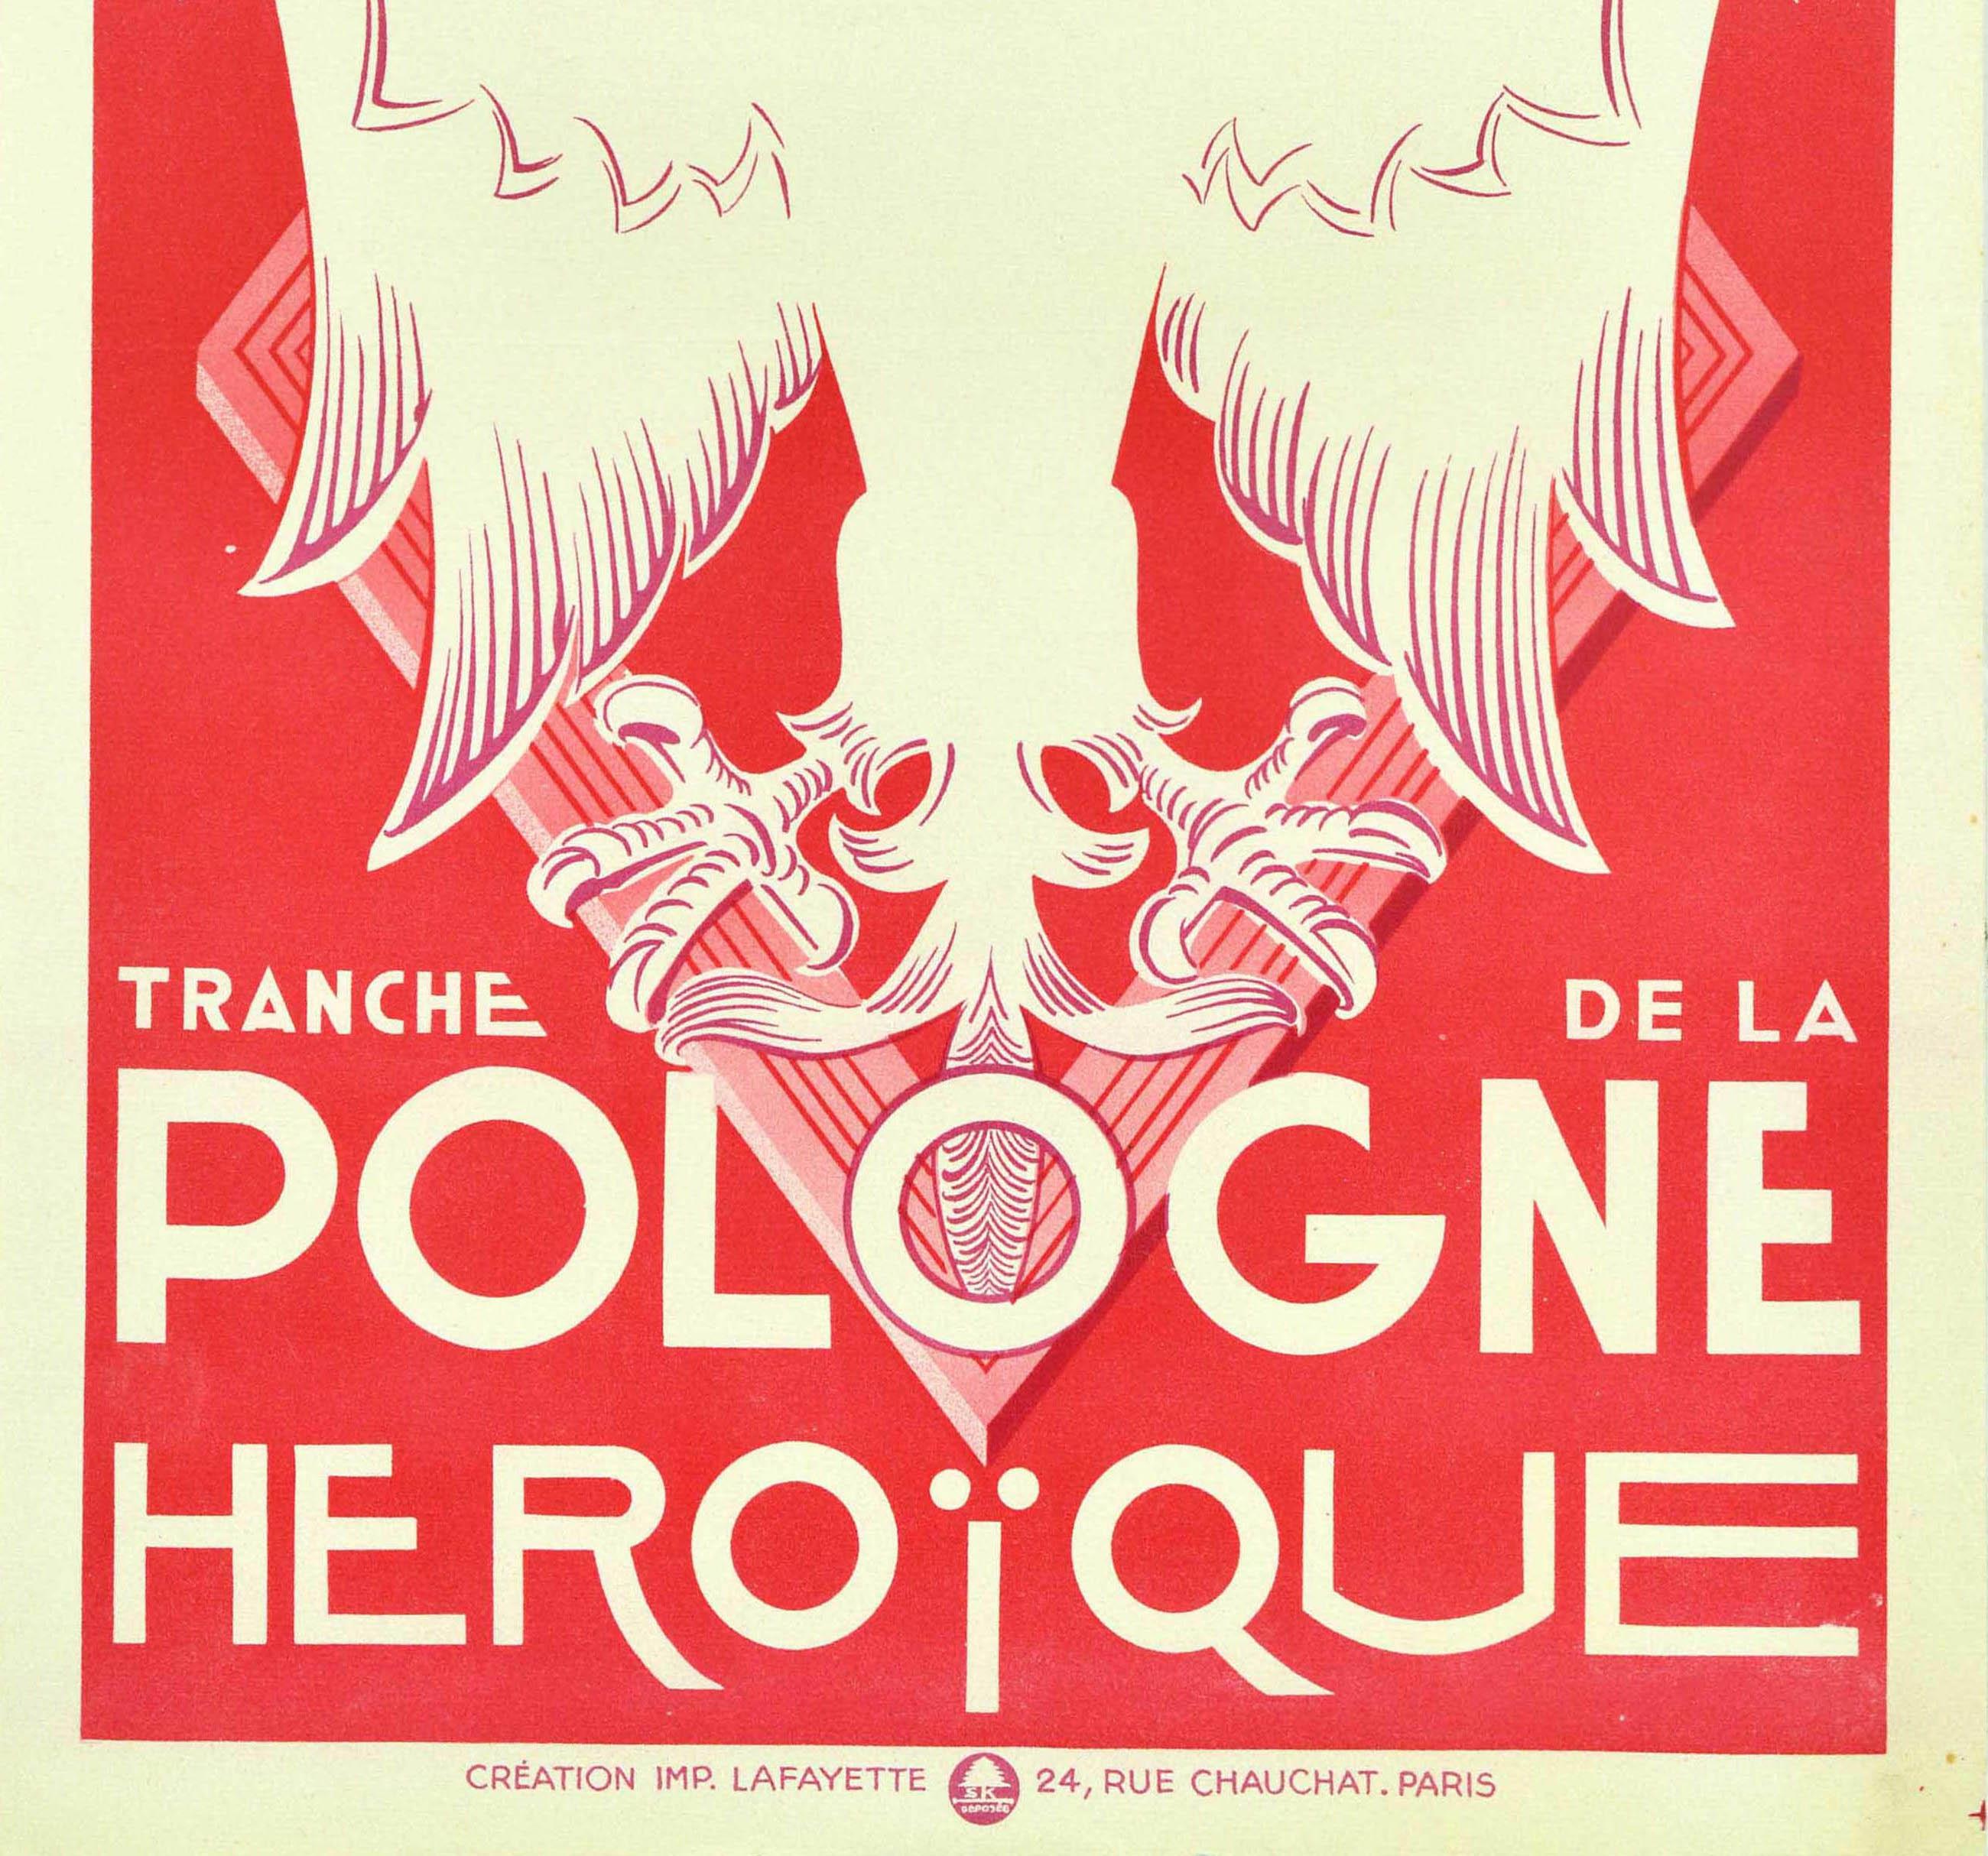 Original vintage advertising poster for the Loterie Nationale 3e Tranche 1940 Tranche de la Pologne Heroique / National Lottery Heroic Poland featuring an illustration of a crowned white eagle set over a diamond shape on the red background, the